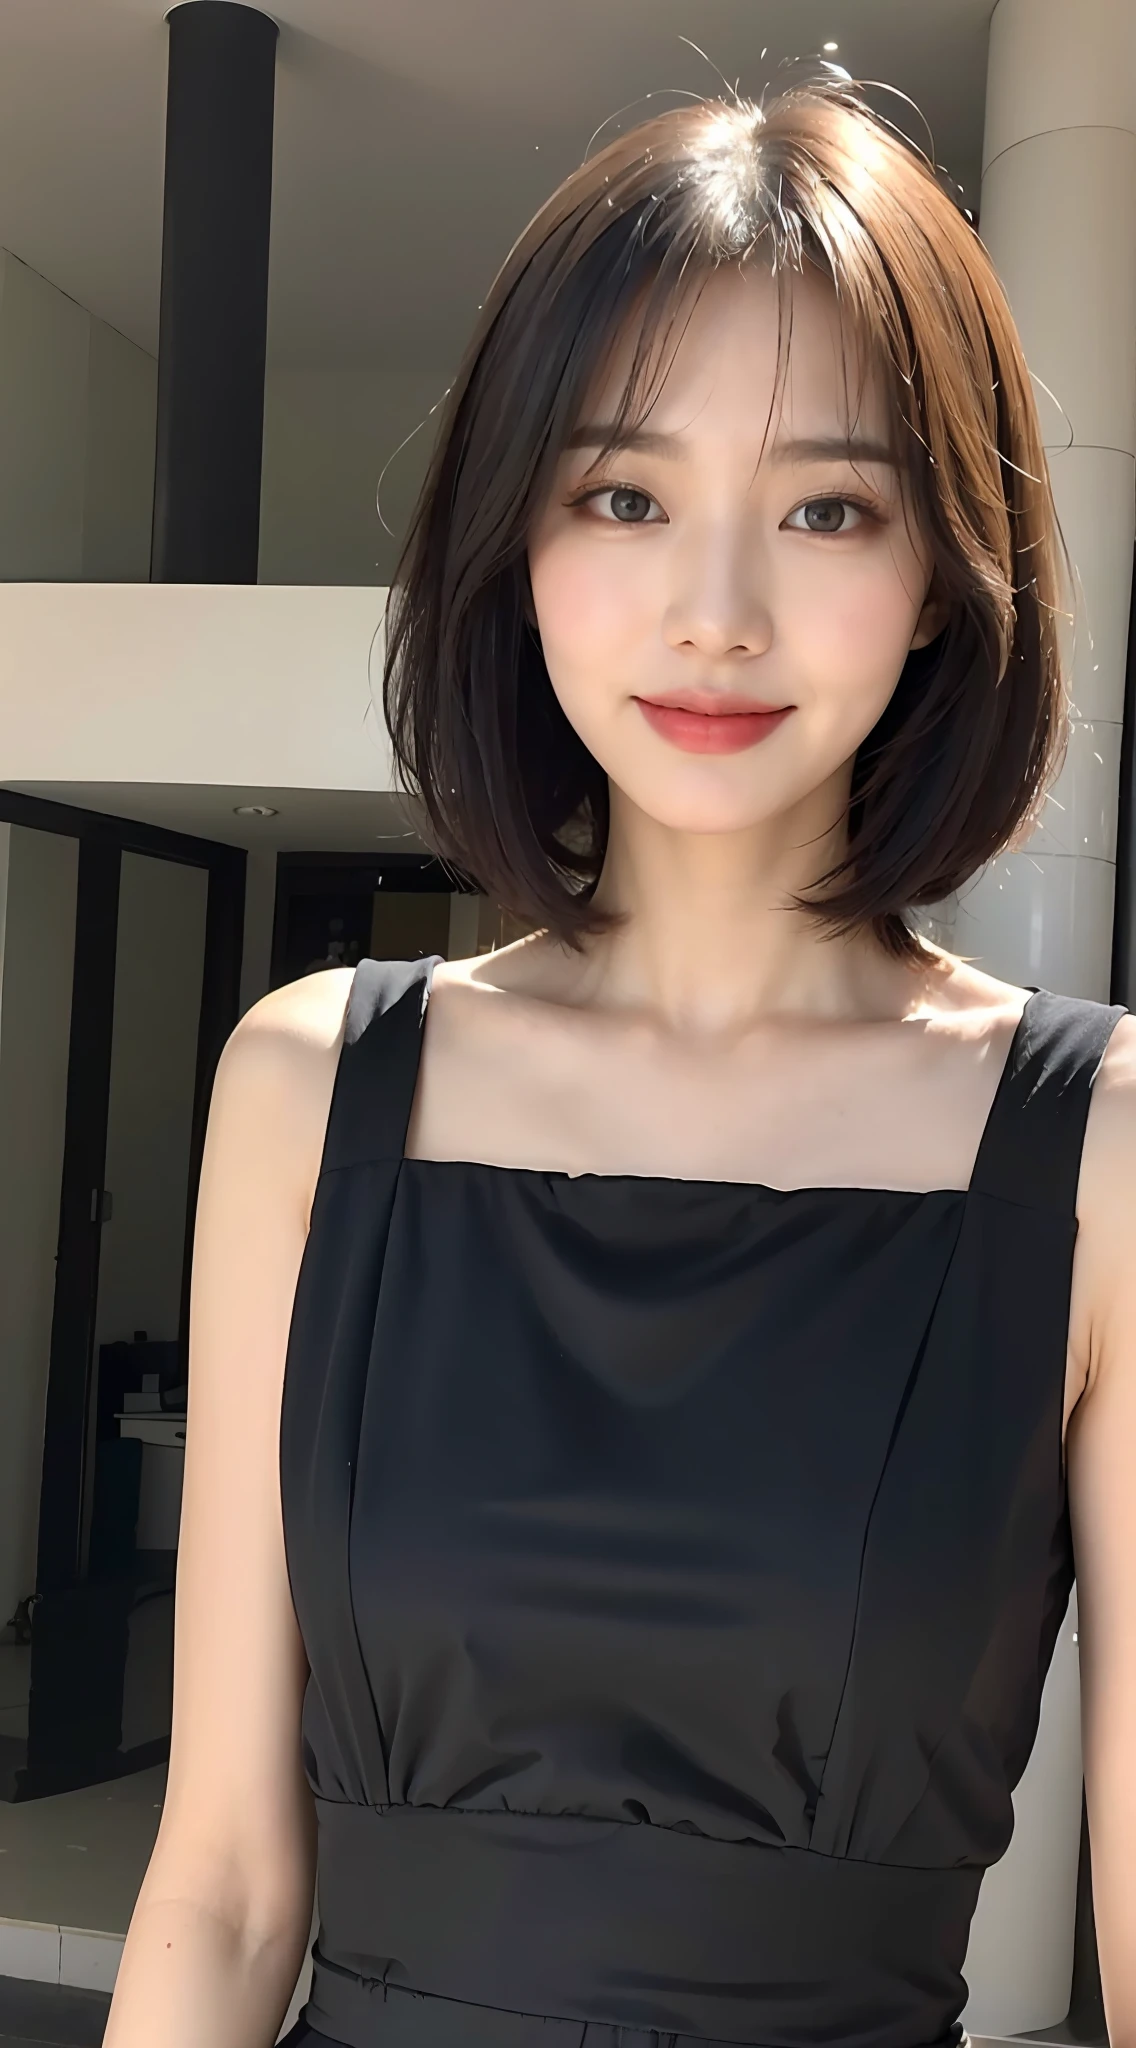 (1 Korean star with royal sister style), ((best quality, 8k, masterpiece: 1.3)), (slender body: 1.3), focus: 1.2, perfect body beauty: 1.4, (smile), (street: 1.3), highly detailed face and skin texture, fine eyes, double eyelids, whitening skin, (short hair, air bangs: 1.3), (round face: 1.5), (little black dress: 1.4),